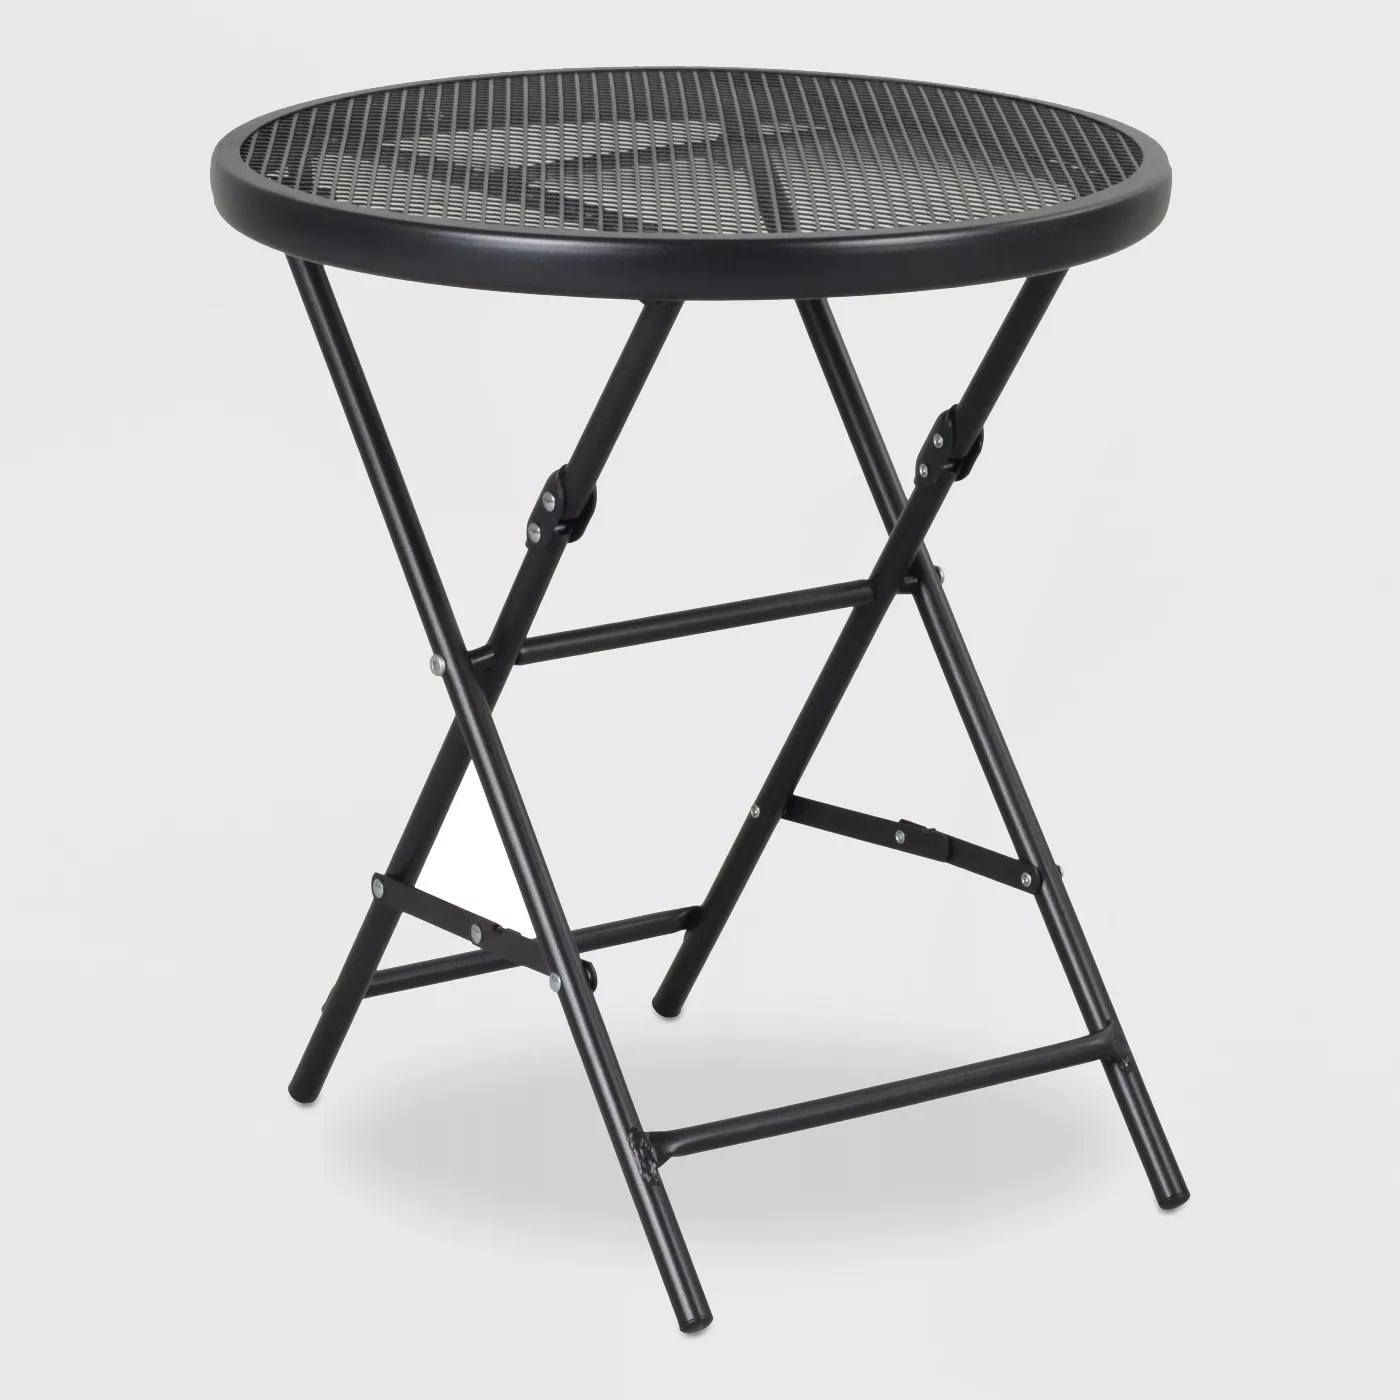 The black table with a mesh surface and four legs